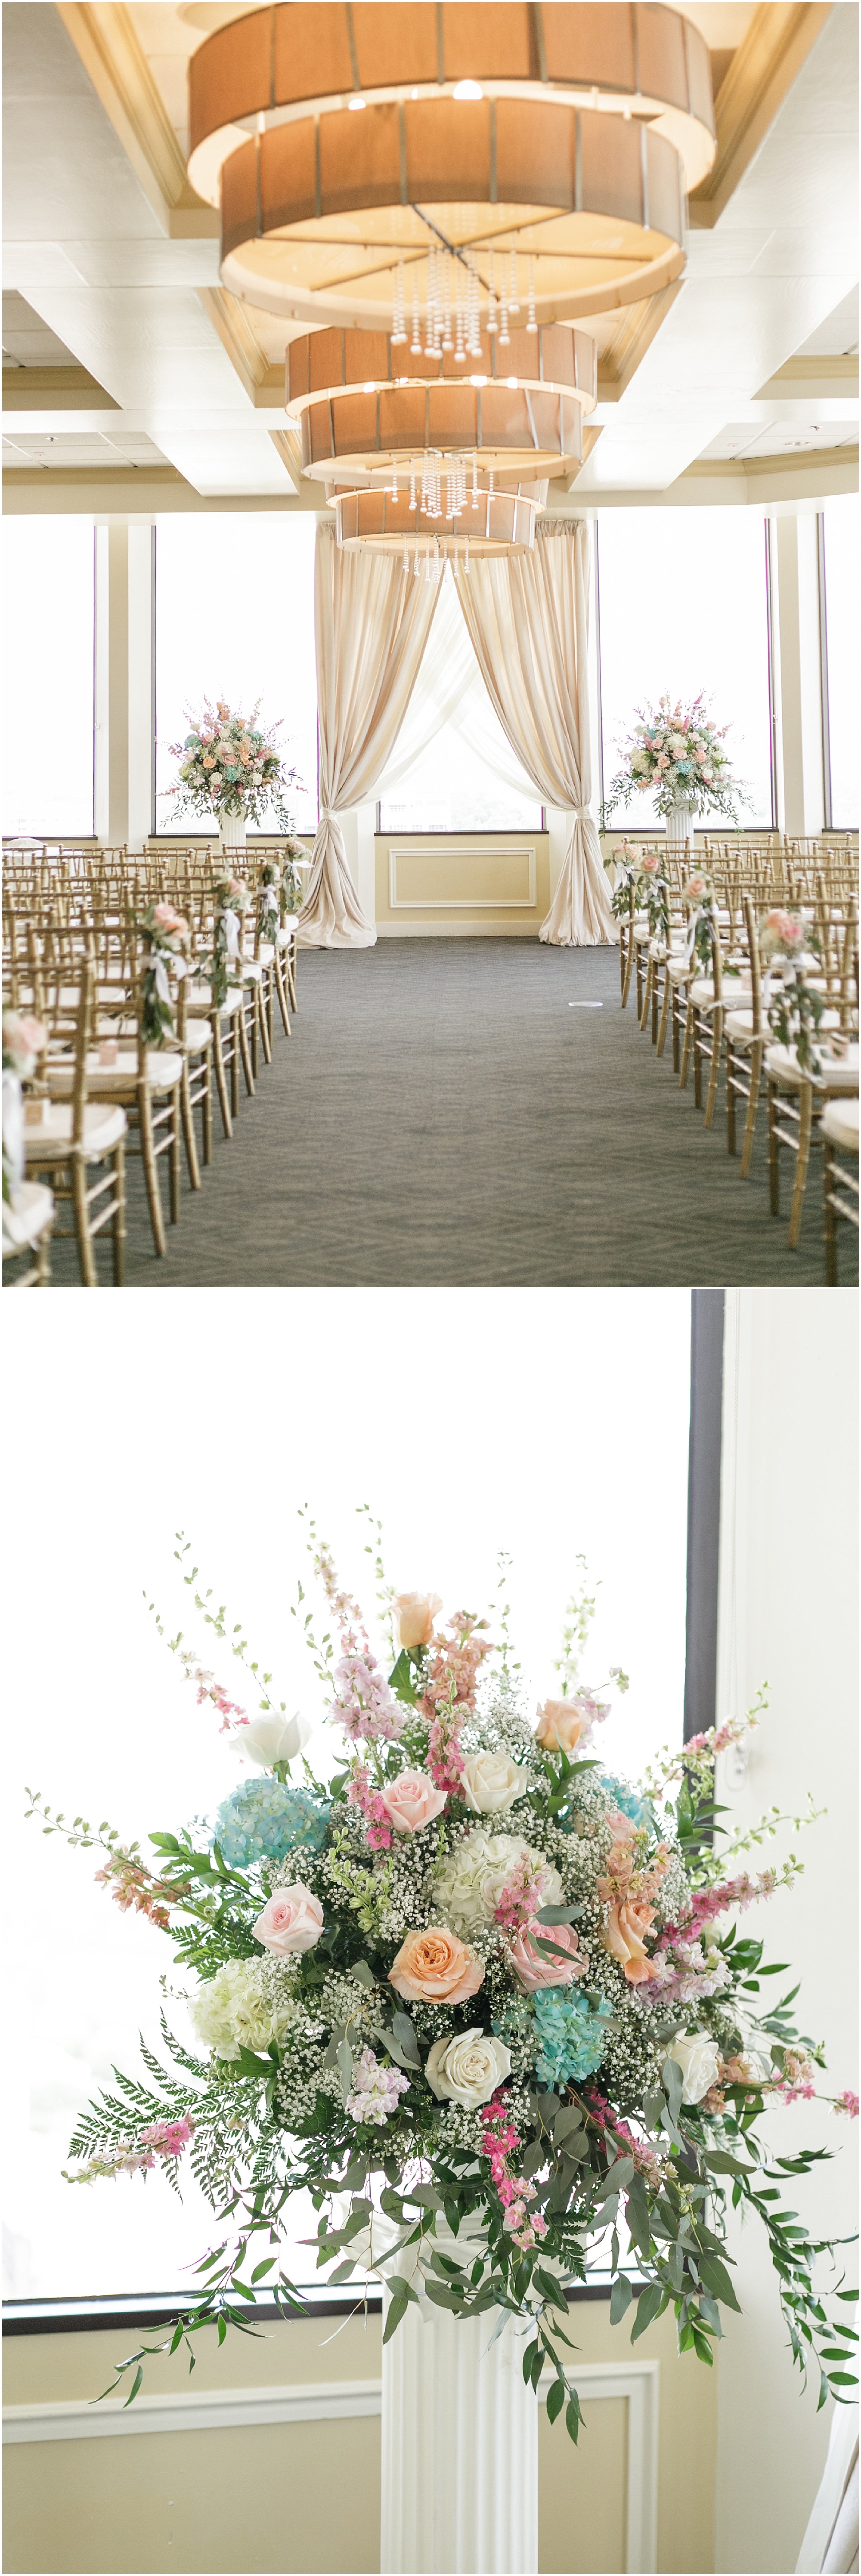 Large chandeliers leading the way to the front of the aisle. 